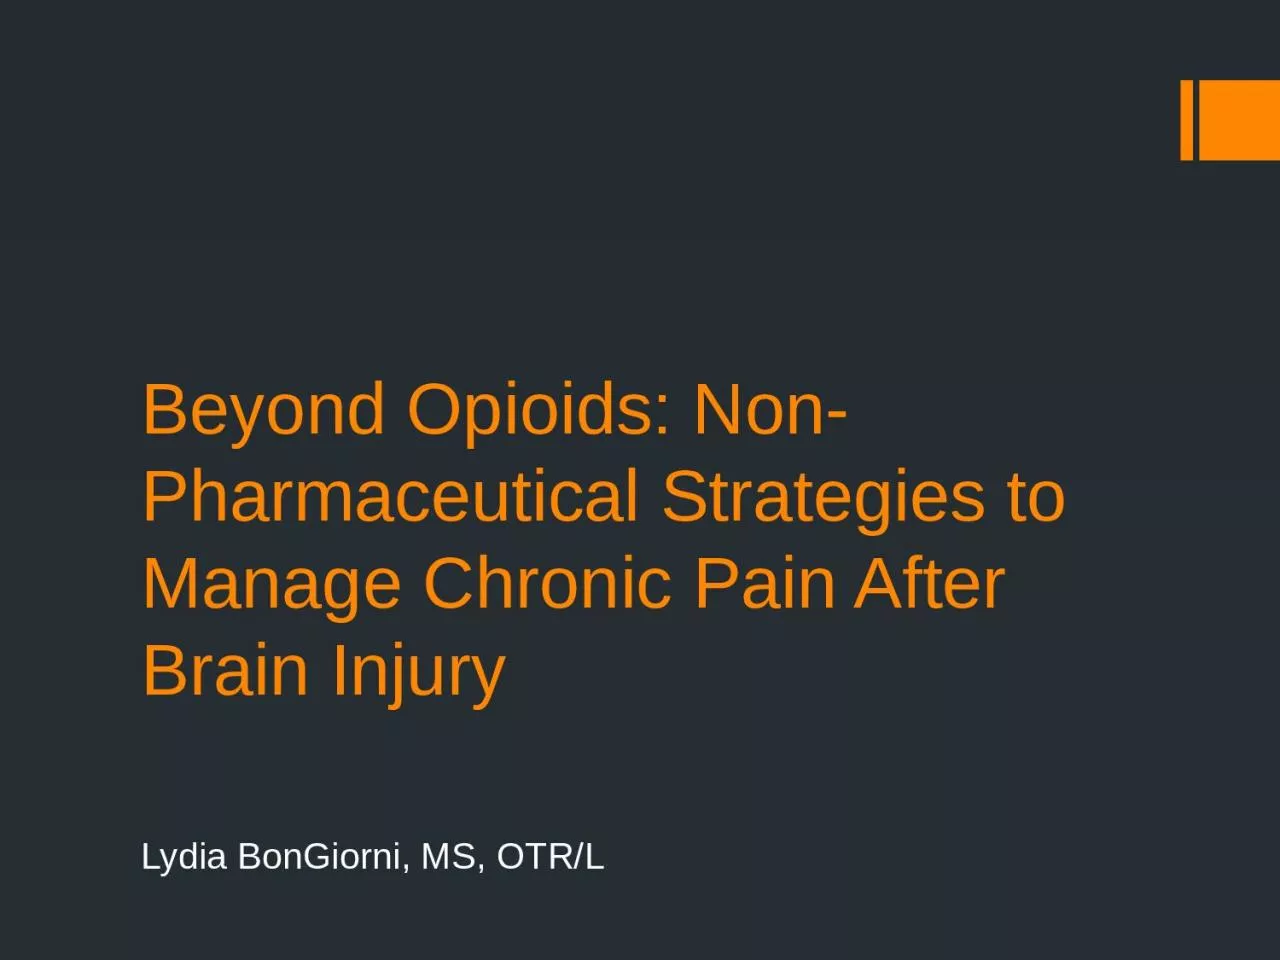 Beyond Opioids: Non-Pharmaceutical Strategies to Manage Chronic Pain After Brain Injury